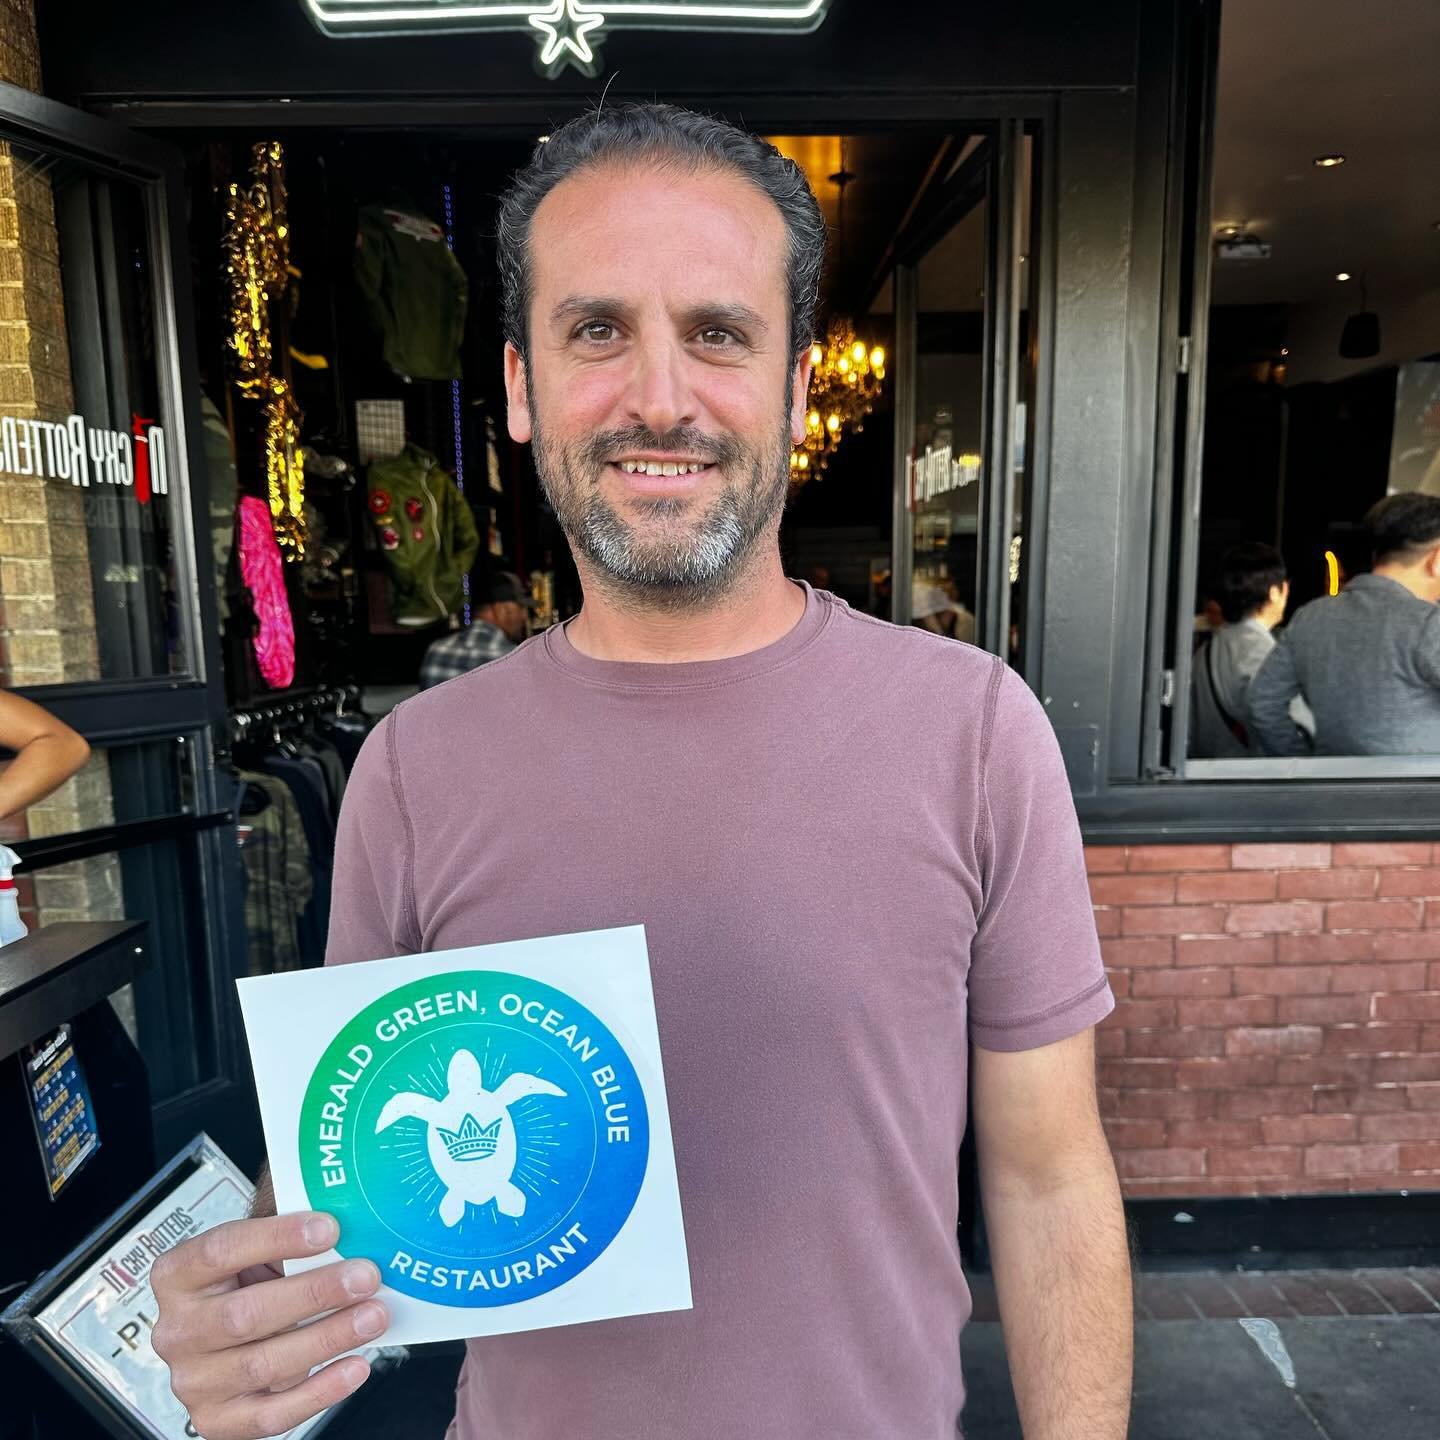 New Emerald Green, Ocean Blue Restaurant Alert! 🚨

Nicky Rottens has committed to a list of simple, sustainable swaps &amp; policies! 🌱

That burger tastes even better now that Nicky&rsquo;s is minimizing its impact on the environment! 🍔🍻